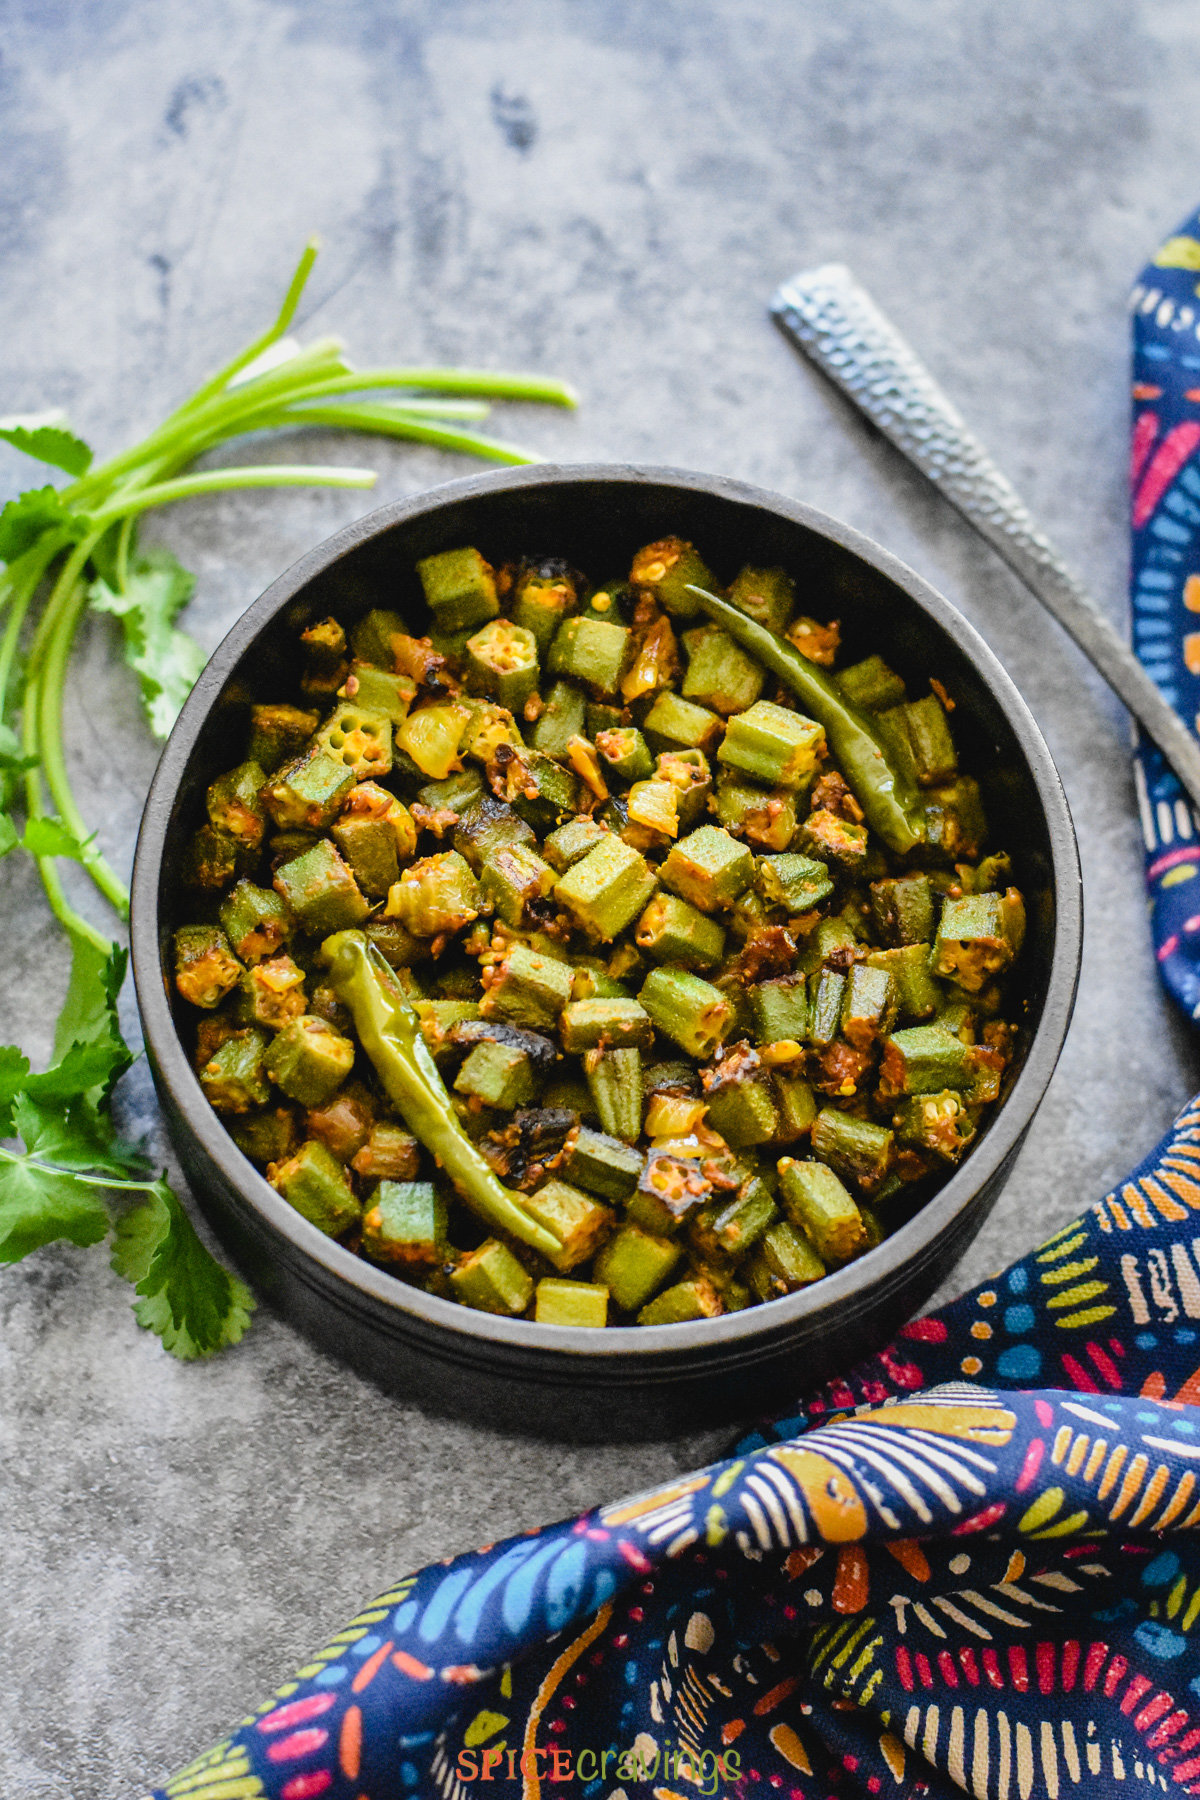 chopped okra, chile, onions and spices in black bowl